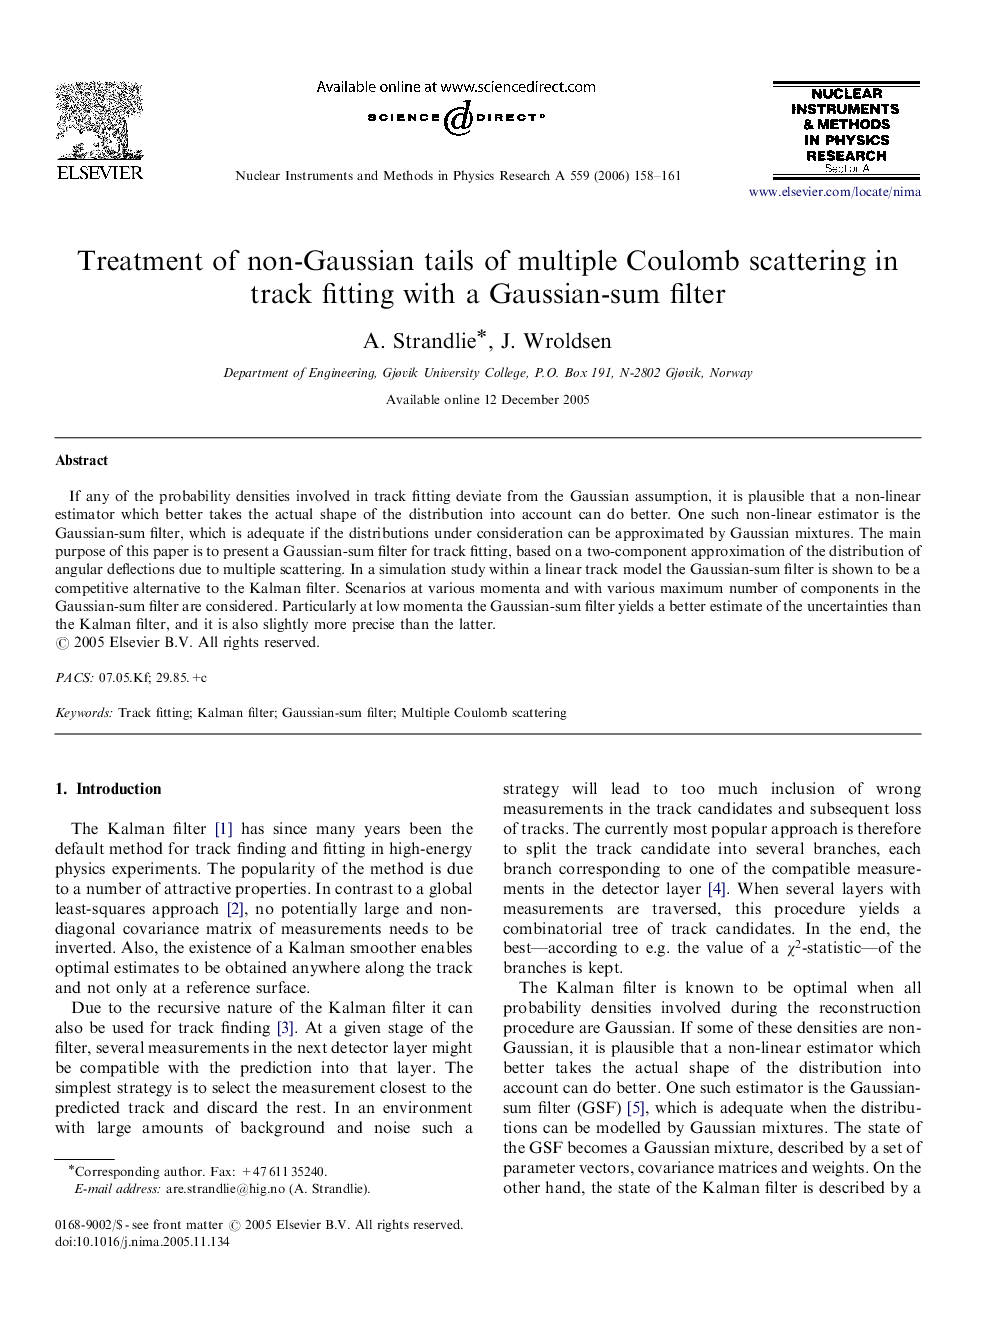 Treatment of non-Gaussian tails of multiple Coulomb scattering in track fitting with a Gaussian-sum filter